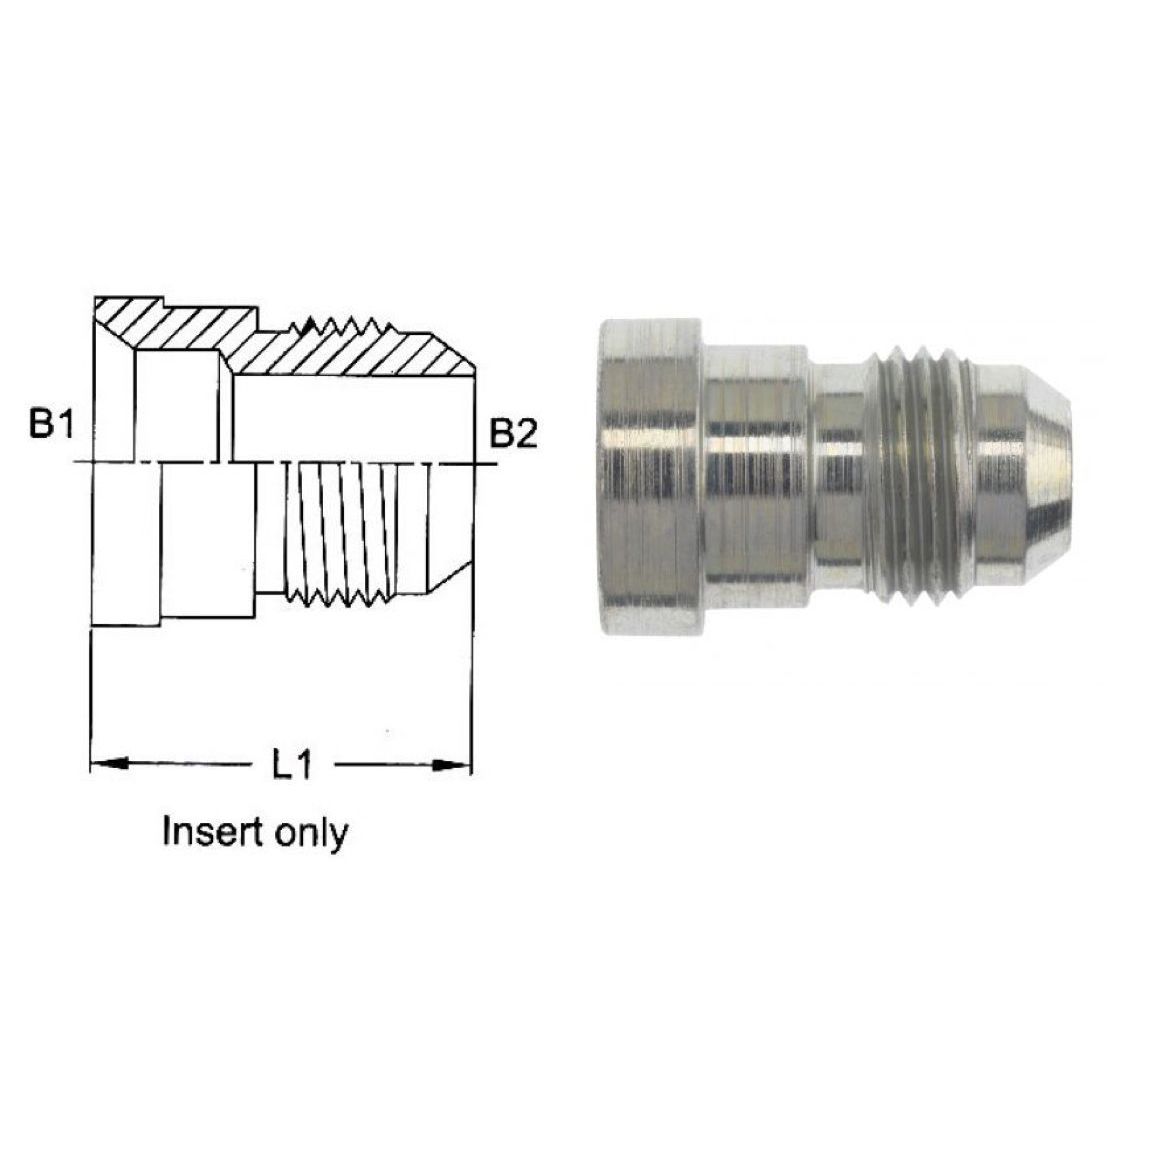 2406-06-04-IN-SS : OneHydraulics  Straight Reducer, Insert only, Straight, 0.375 (3/8") Female JIC x 0.25 (1/4") Male, Stainless Steel, 7200psi